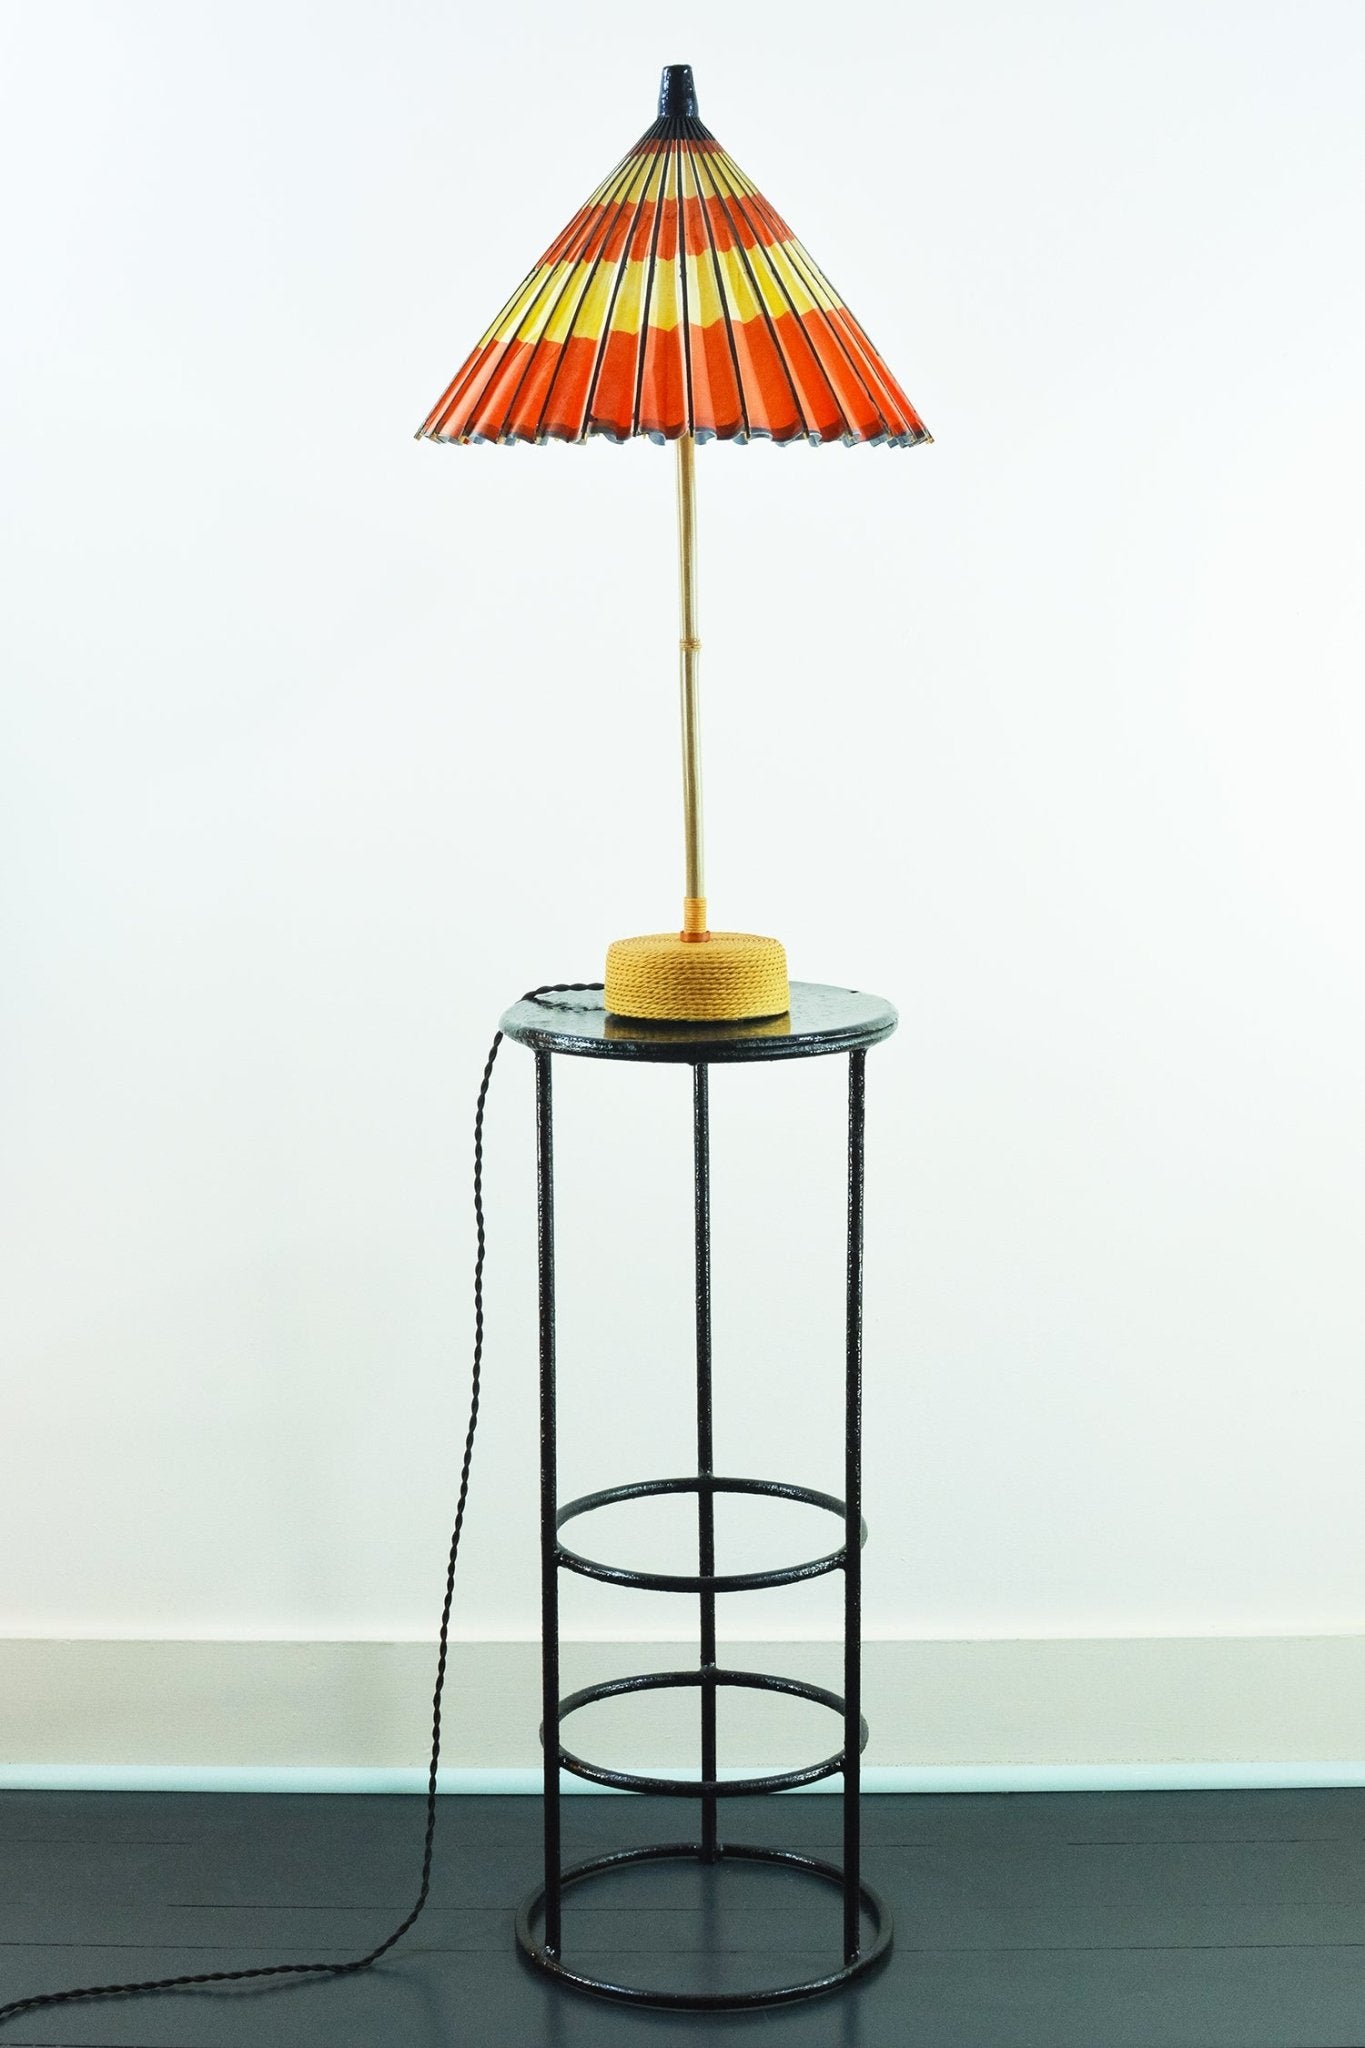 Red Spiral 'World's Fair' Table Lamp with Parasol Shade and Coiled Seagrass Base — Model No. 012 - Tennant New York